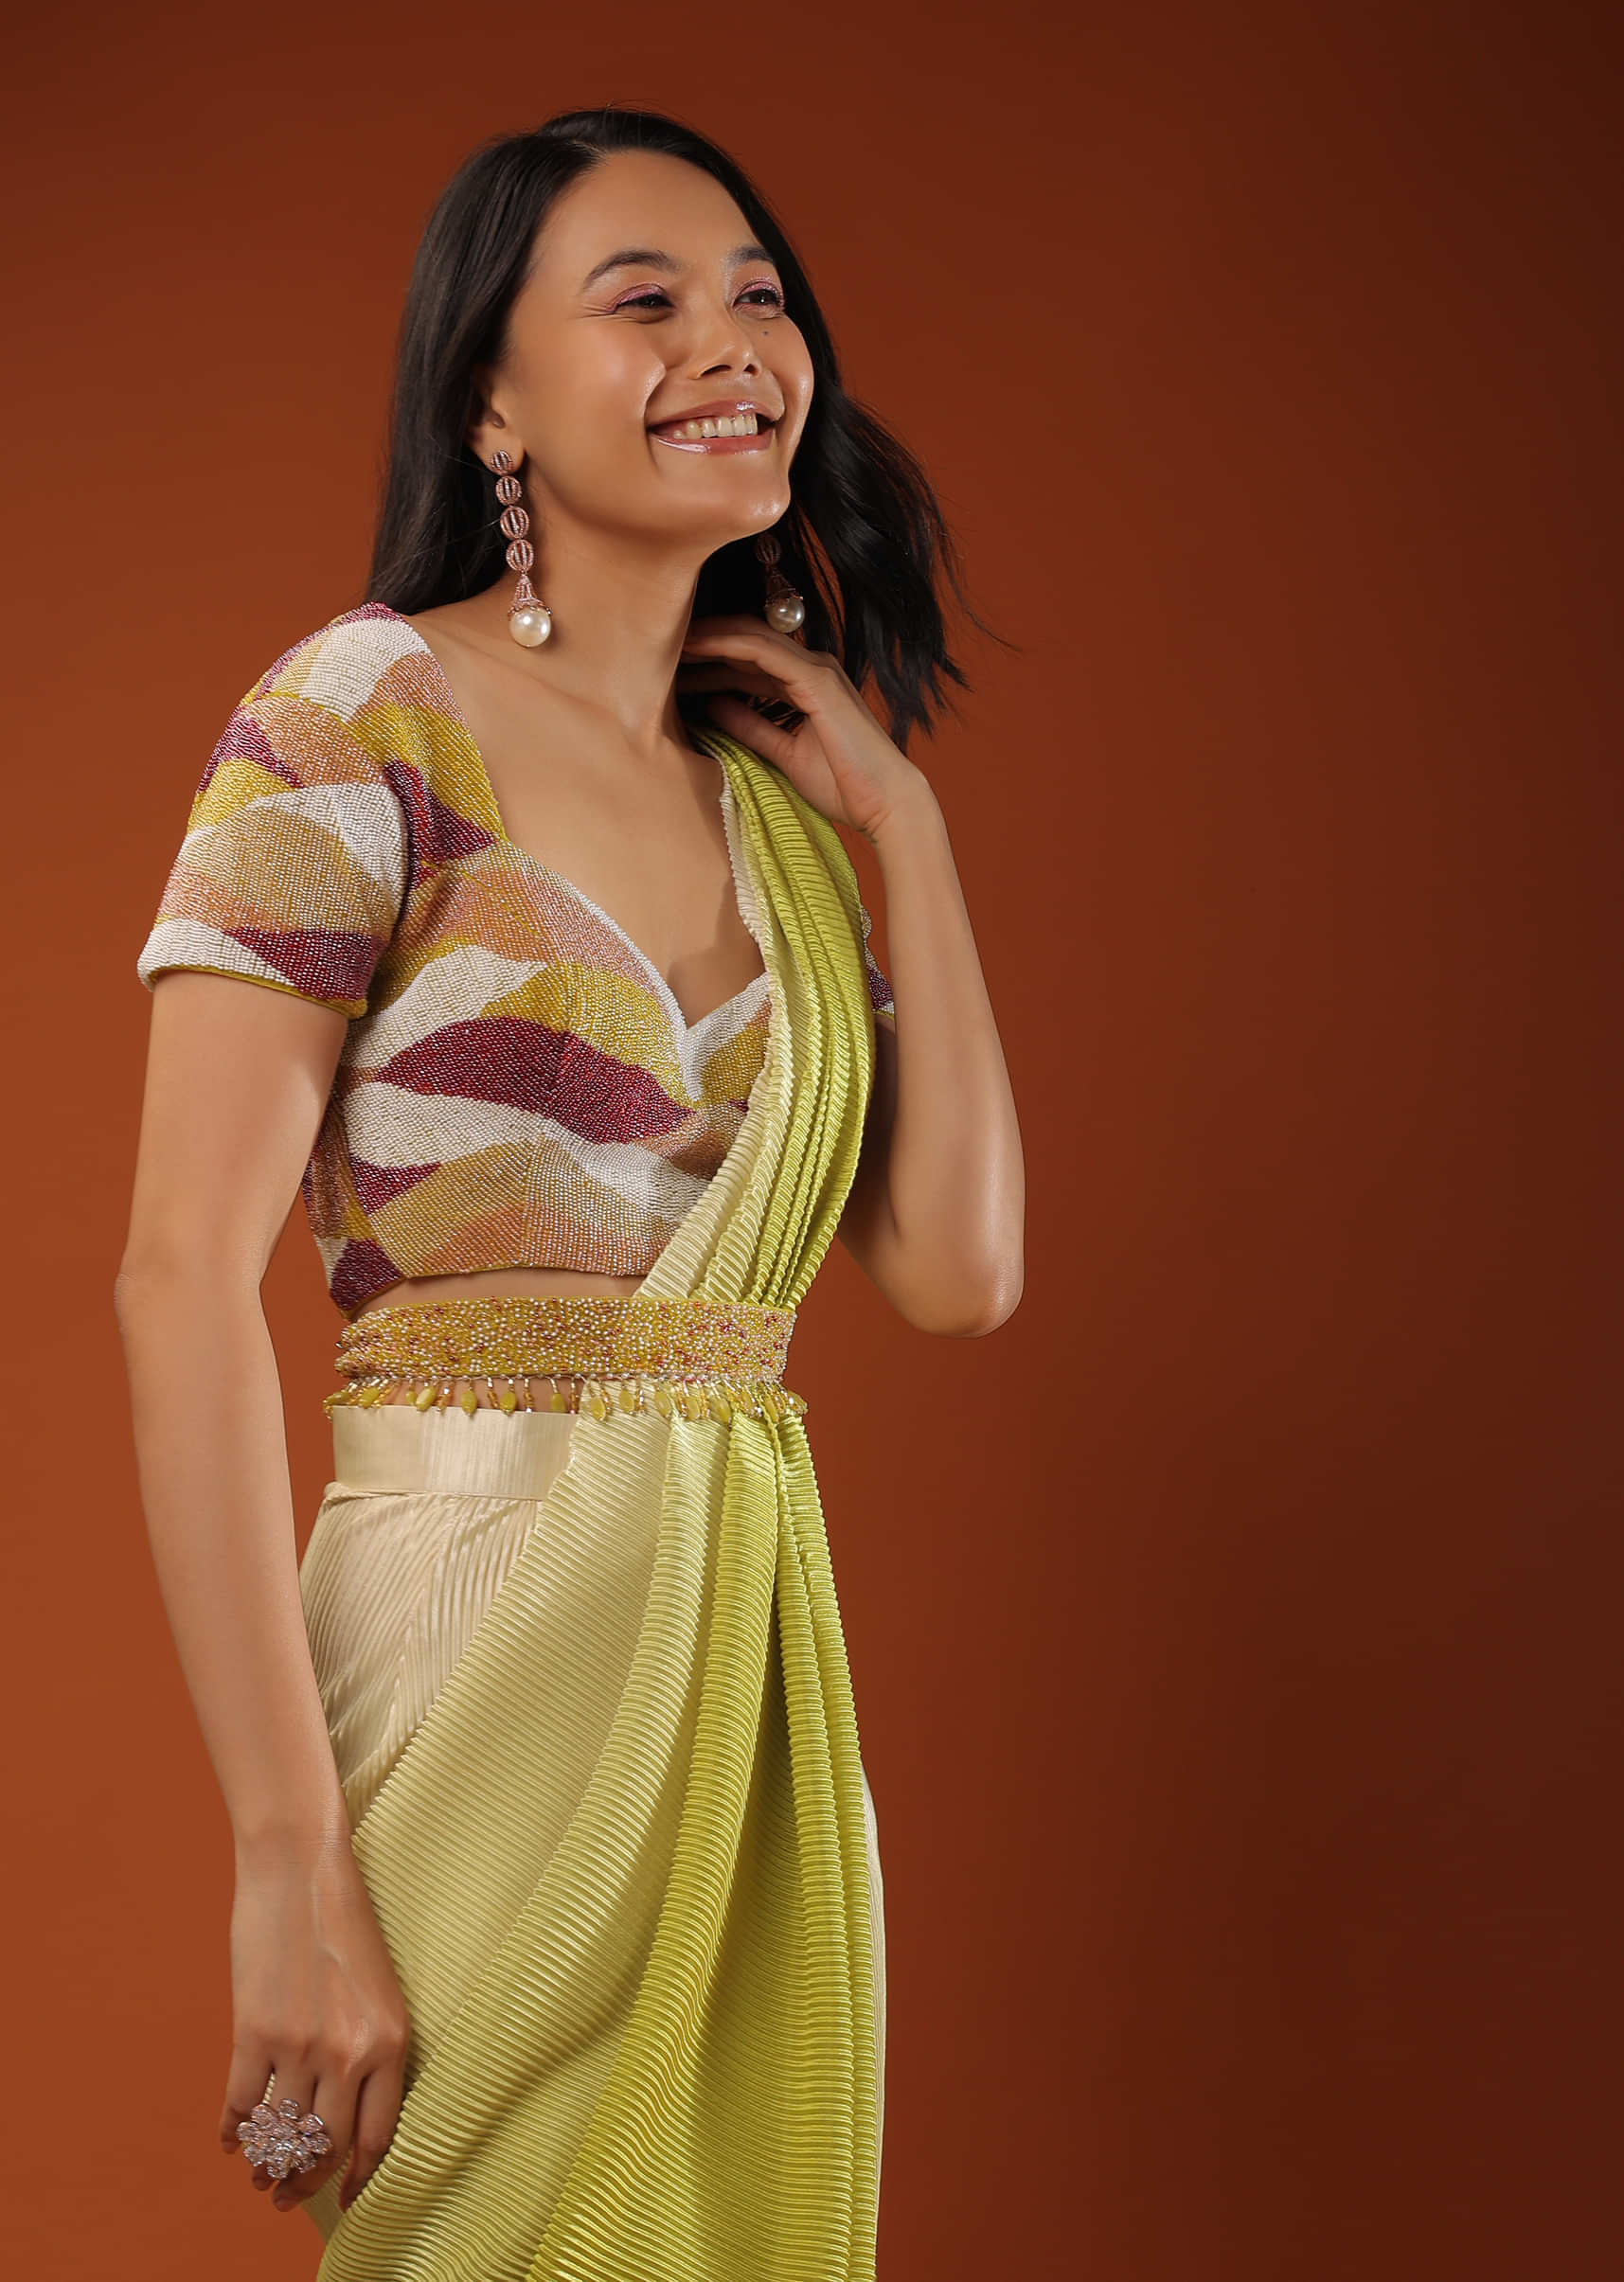 Lemon Green Ombre Saree With A Crop Top In Moti Embroidery, Crop Top Comes In Half Sleeves And Sweet Heart Neckline